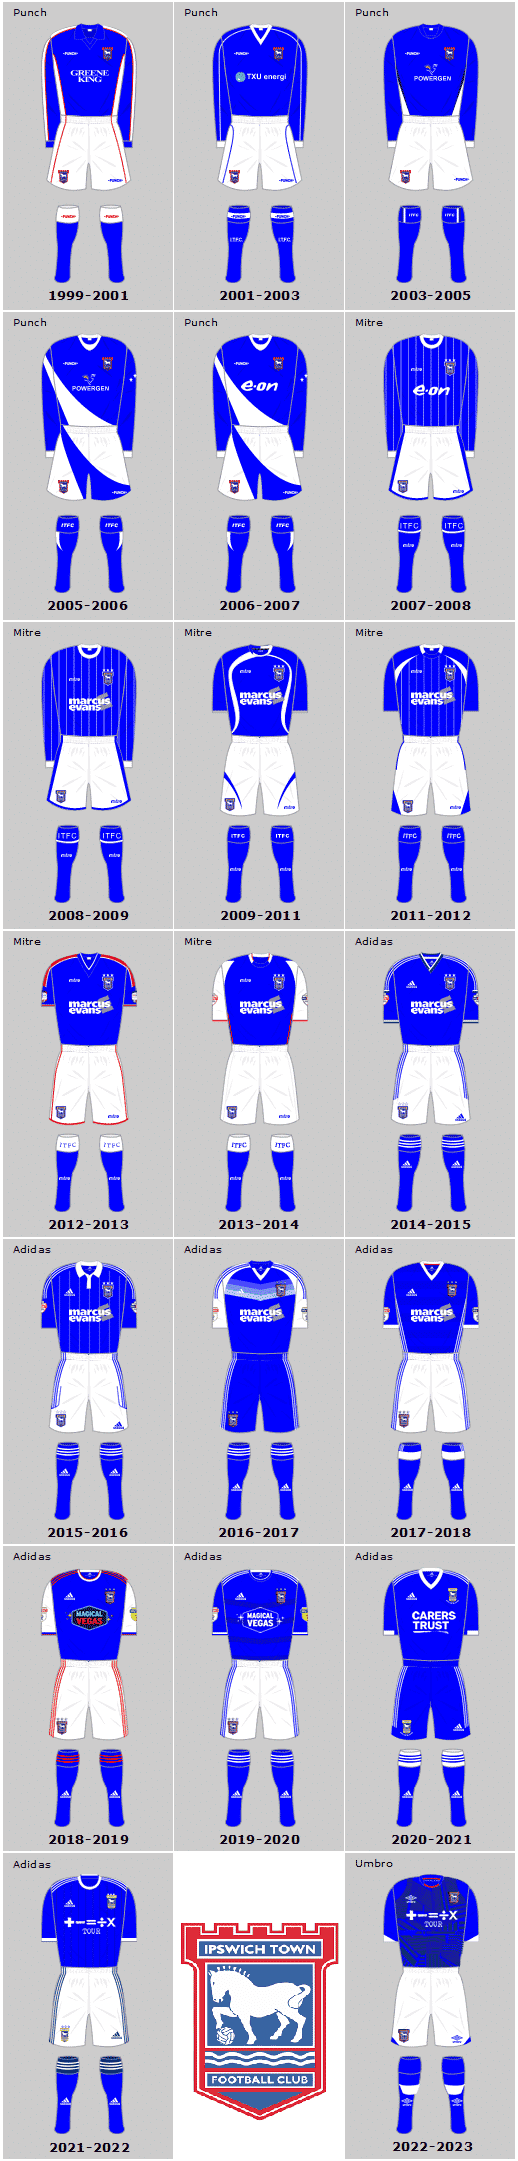 Ipswich Town 21st Century Home Playing Kits